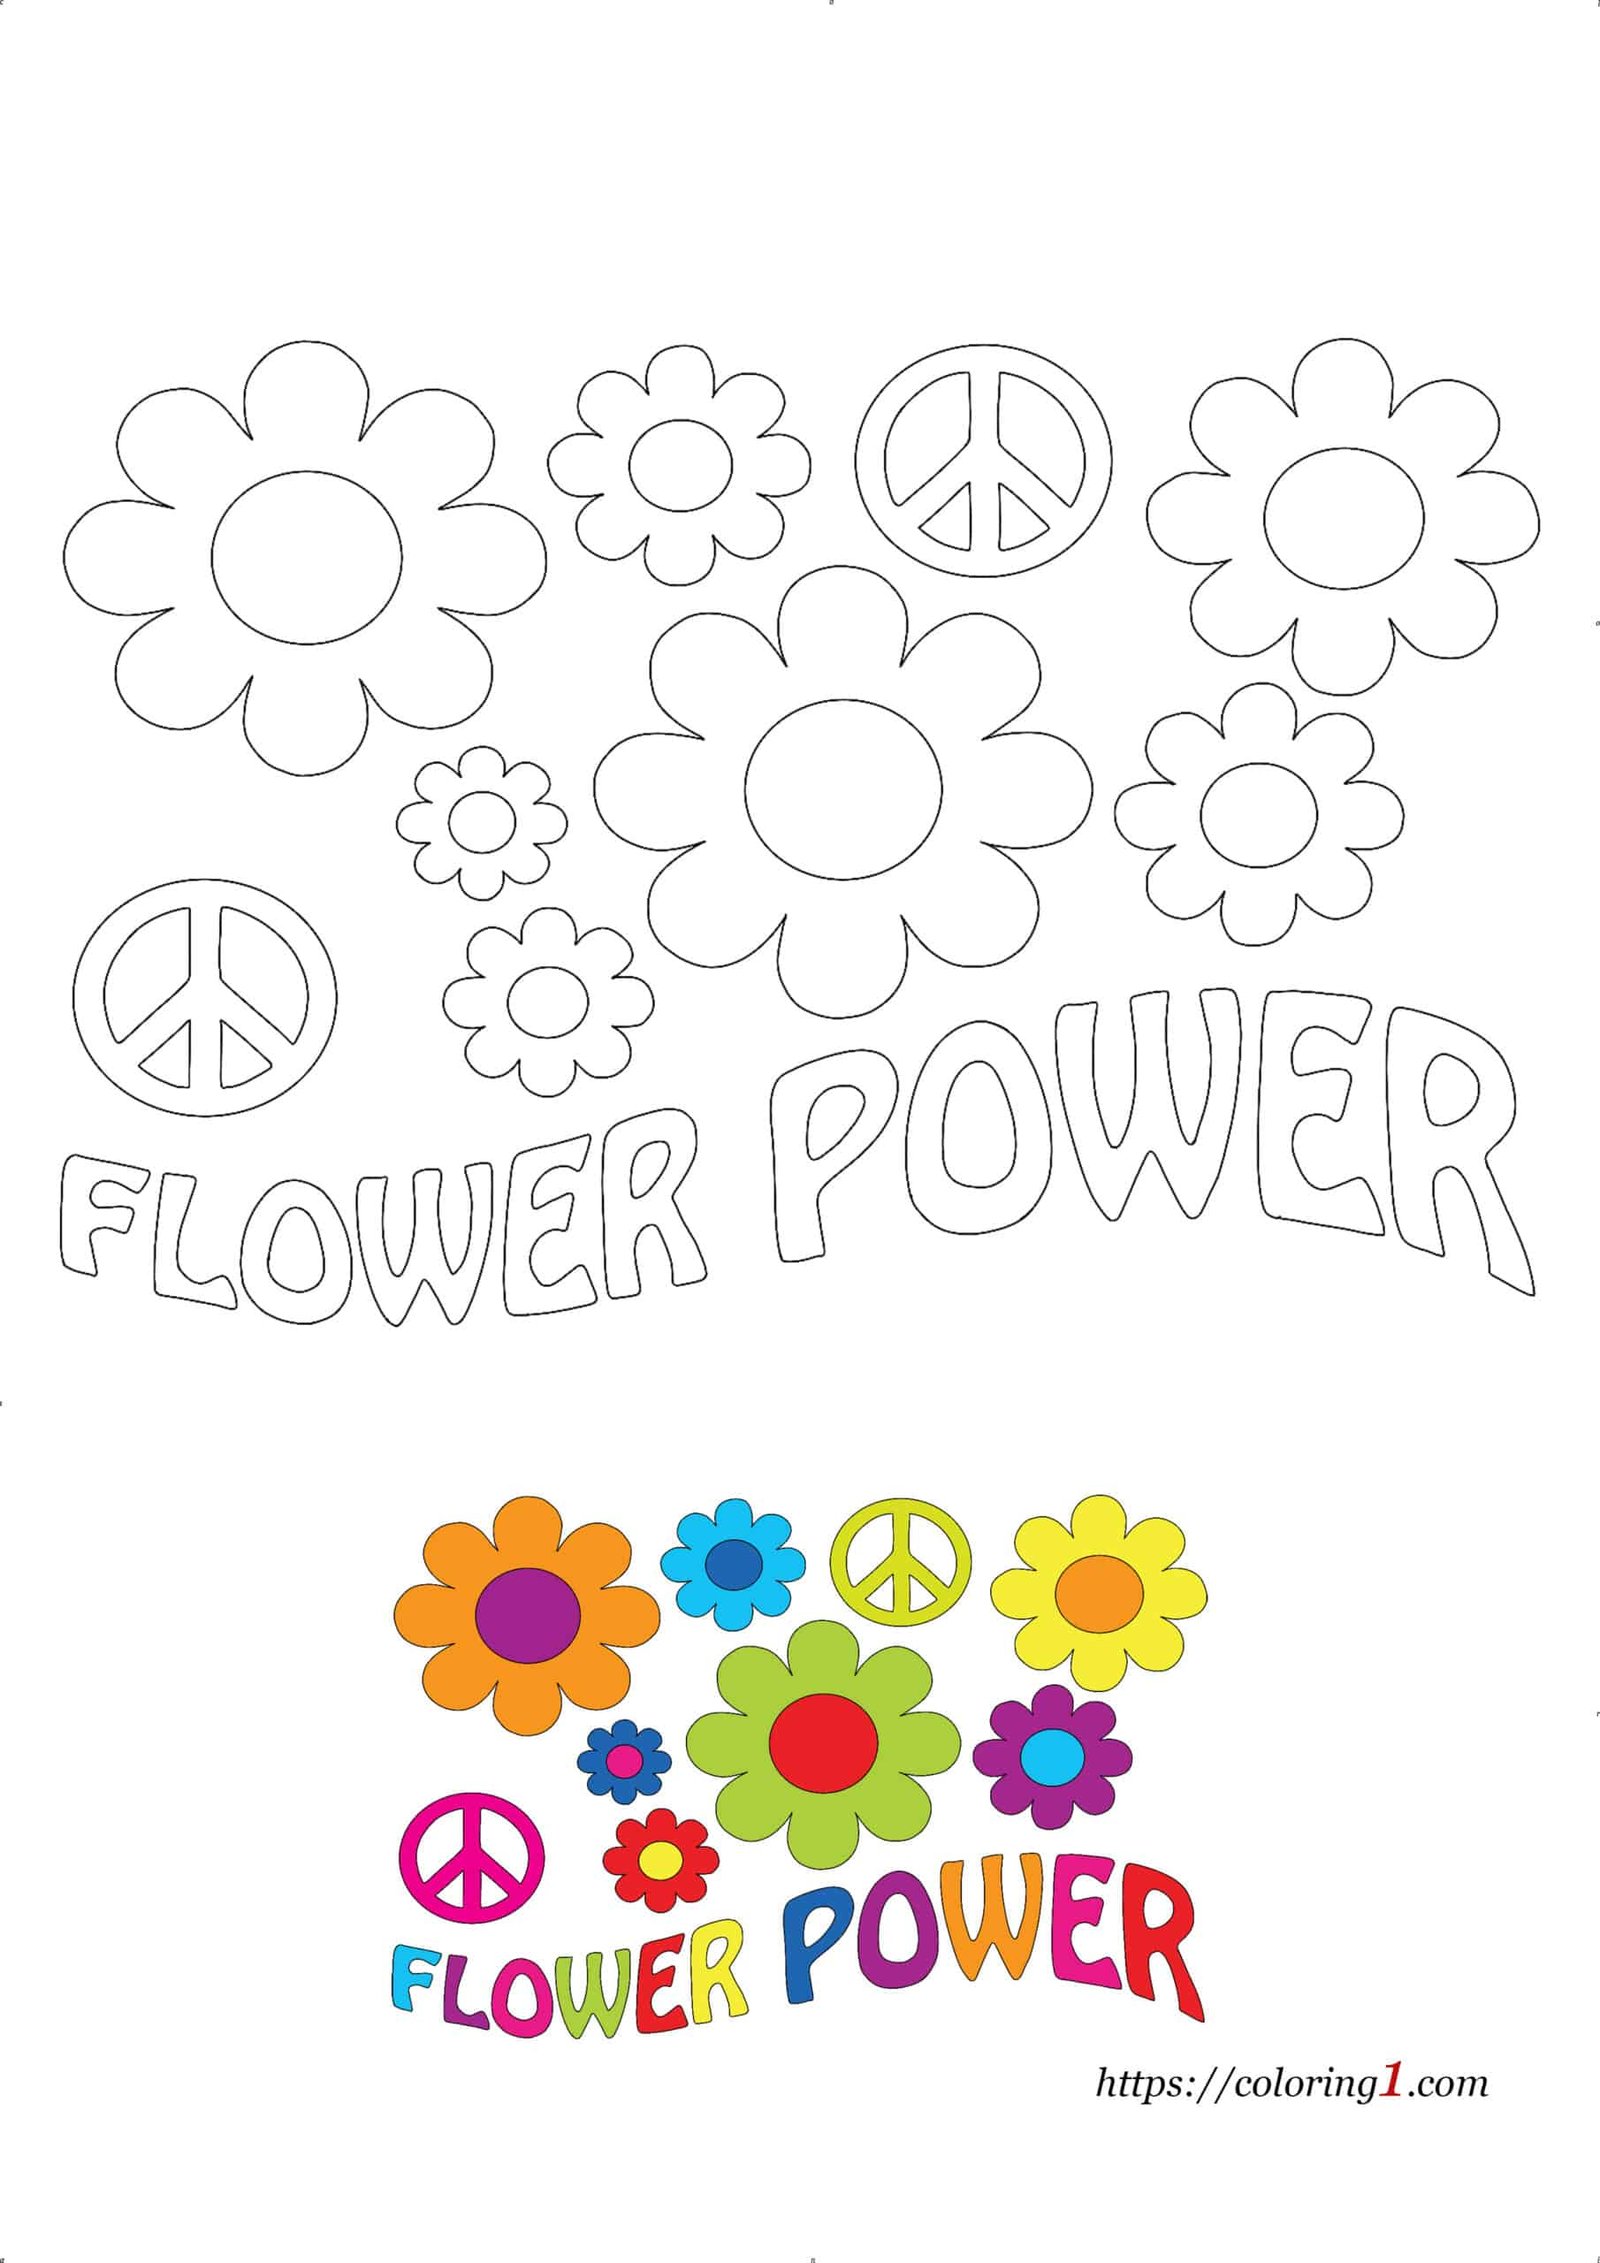 Flower Power free coloring page with sample how to color